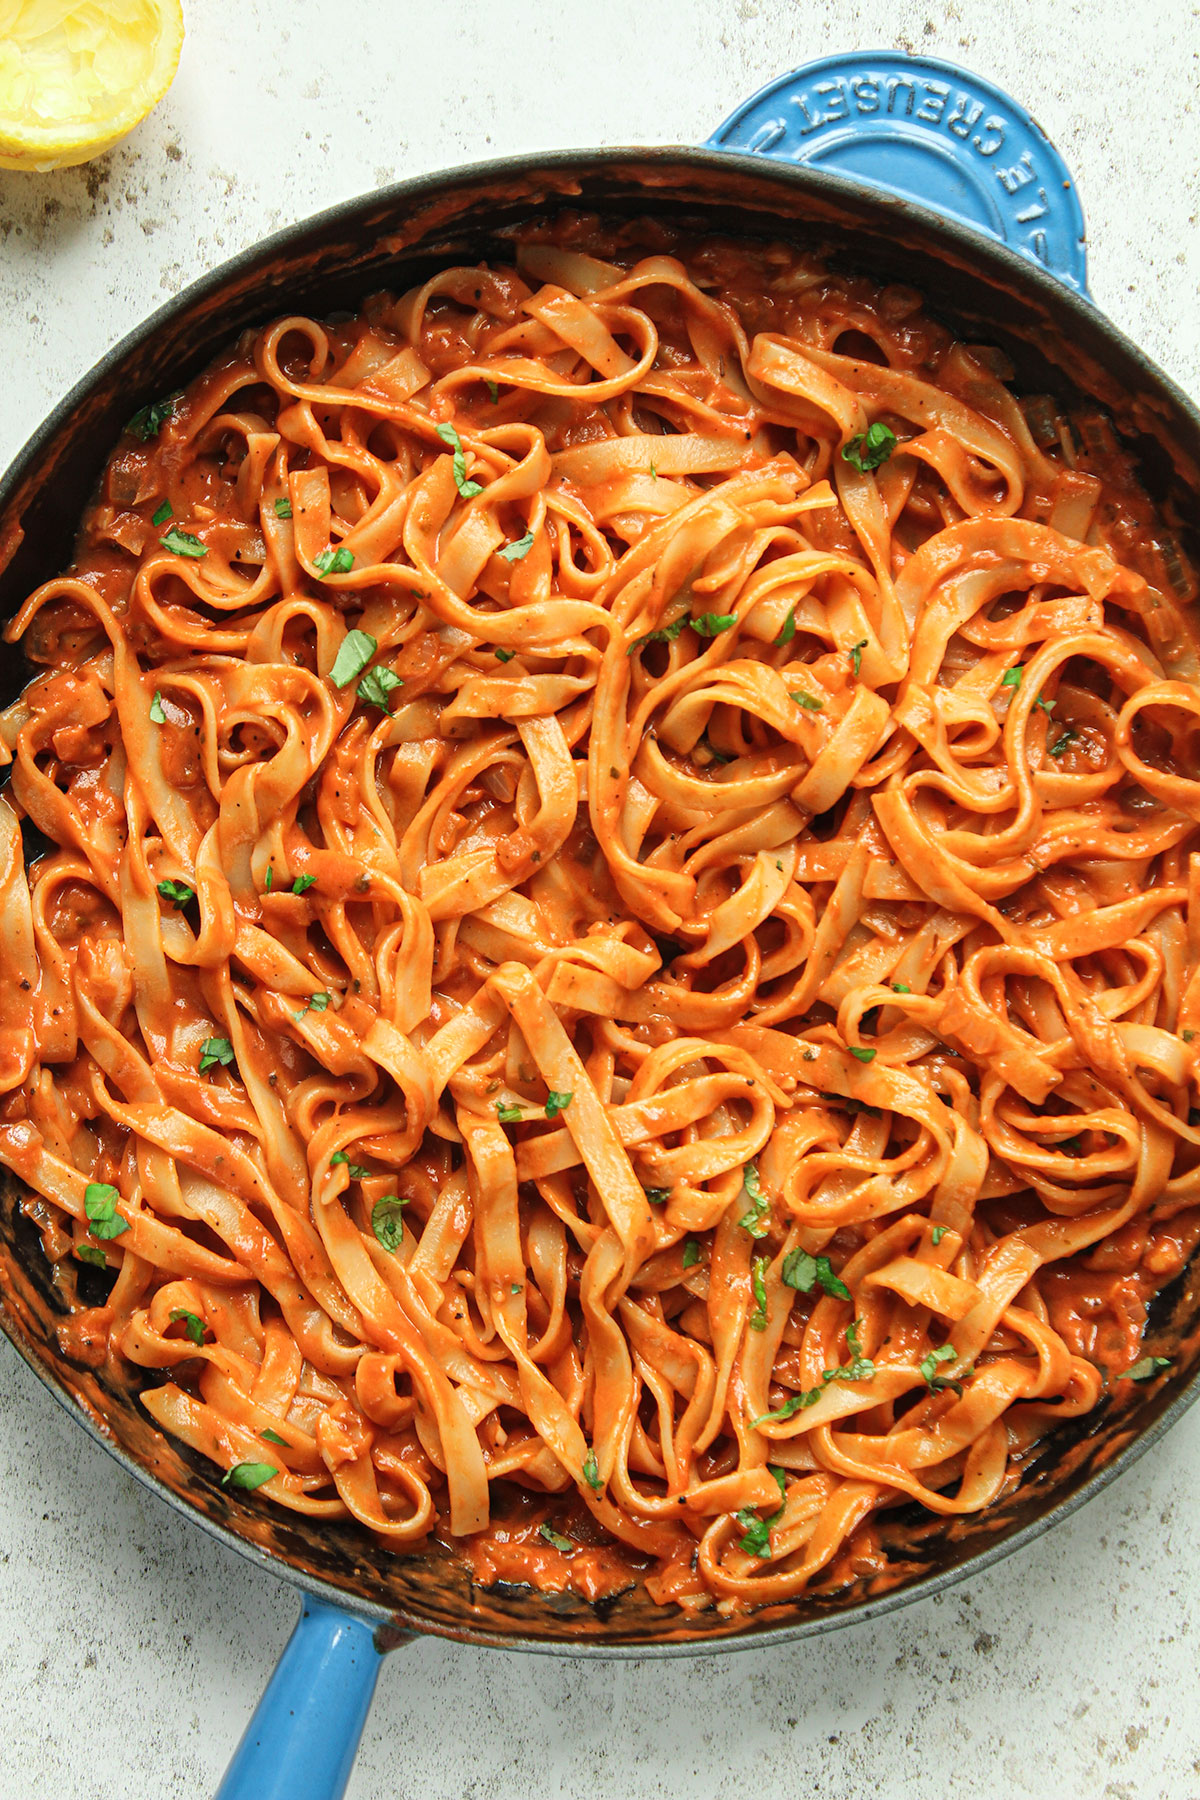 The cooked pasta with added passata sauce in a frying pan on a white background.